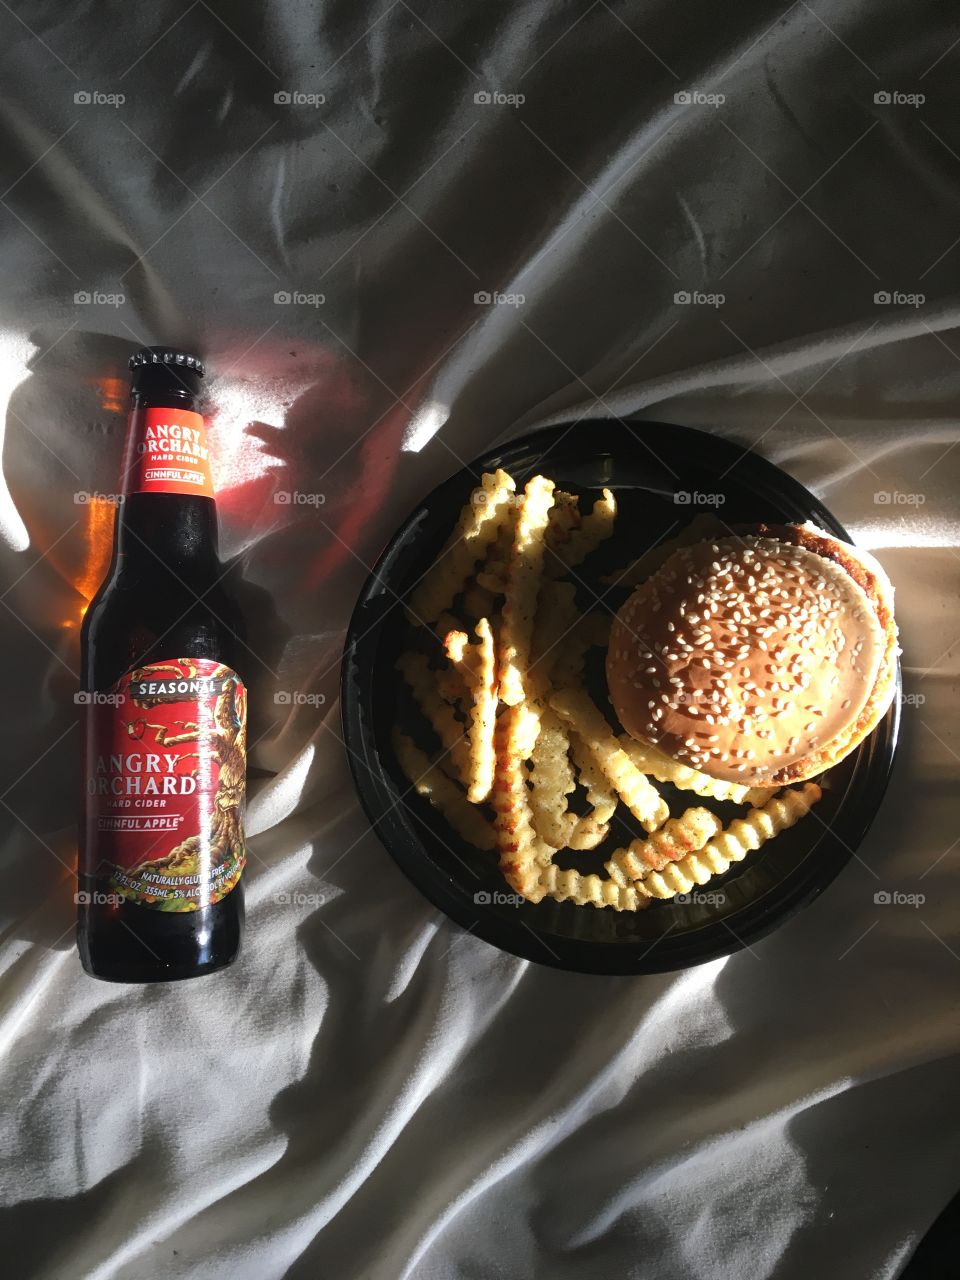 21st birthday special dinner, veggie burgers and a cold ale 